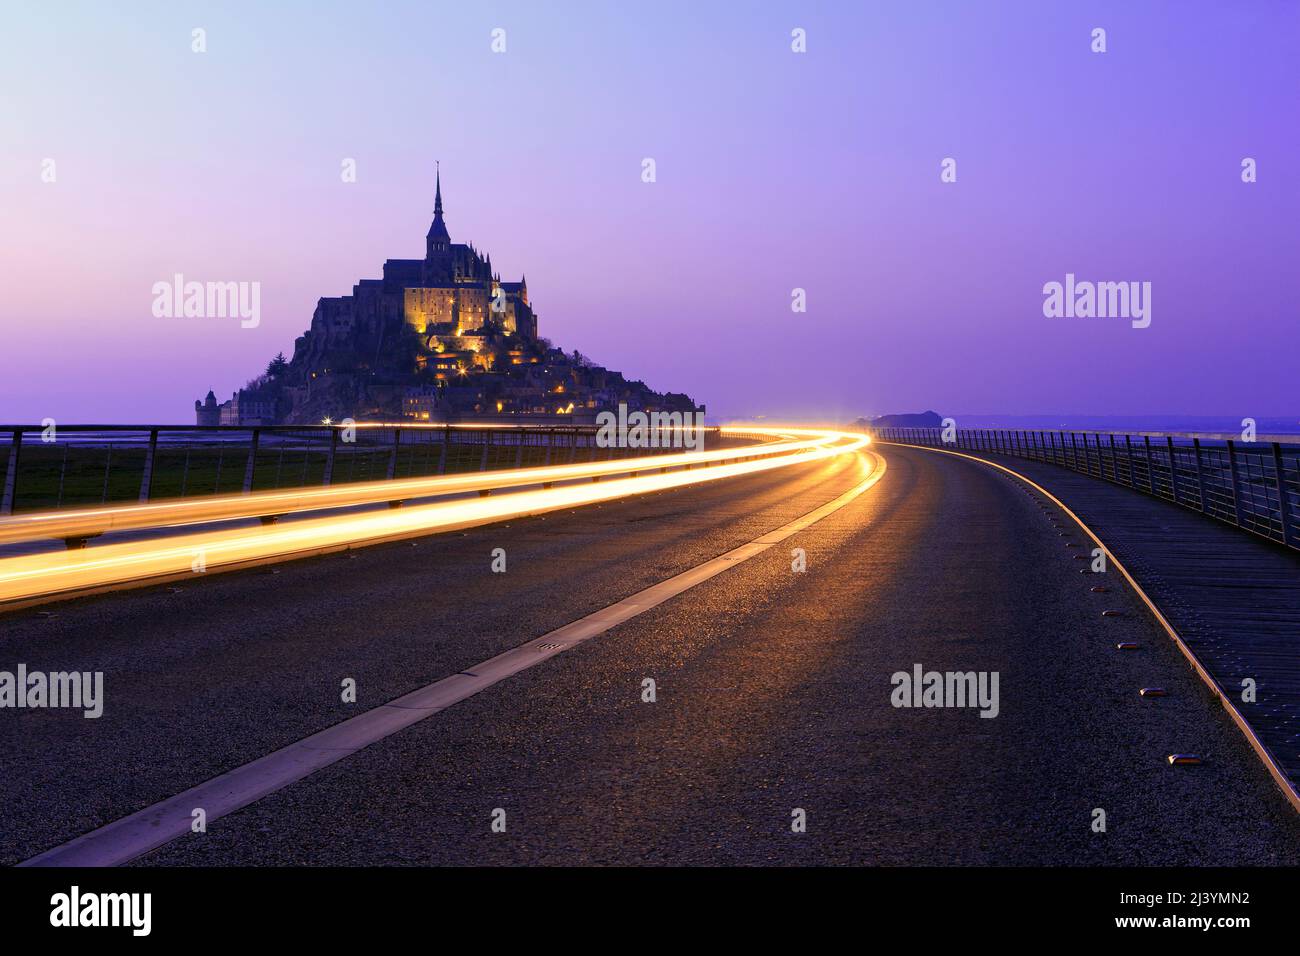 The Mont-Saint-Michel (Saint Michael's Mount), a medieval Christian tidal islet and UNESCO World Heritage Site at twilight in Normandy, France Stock Photo